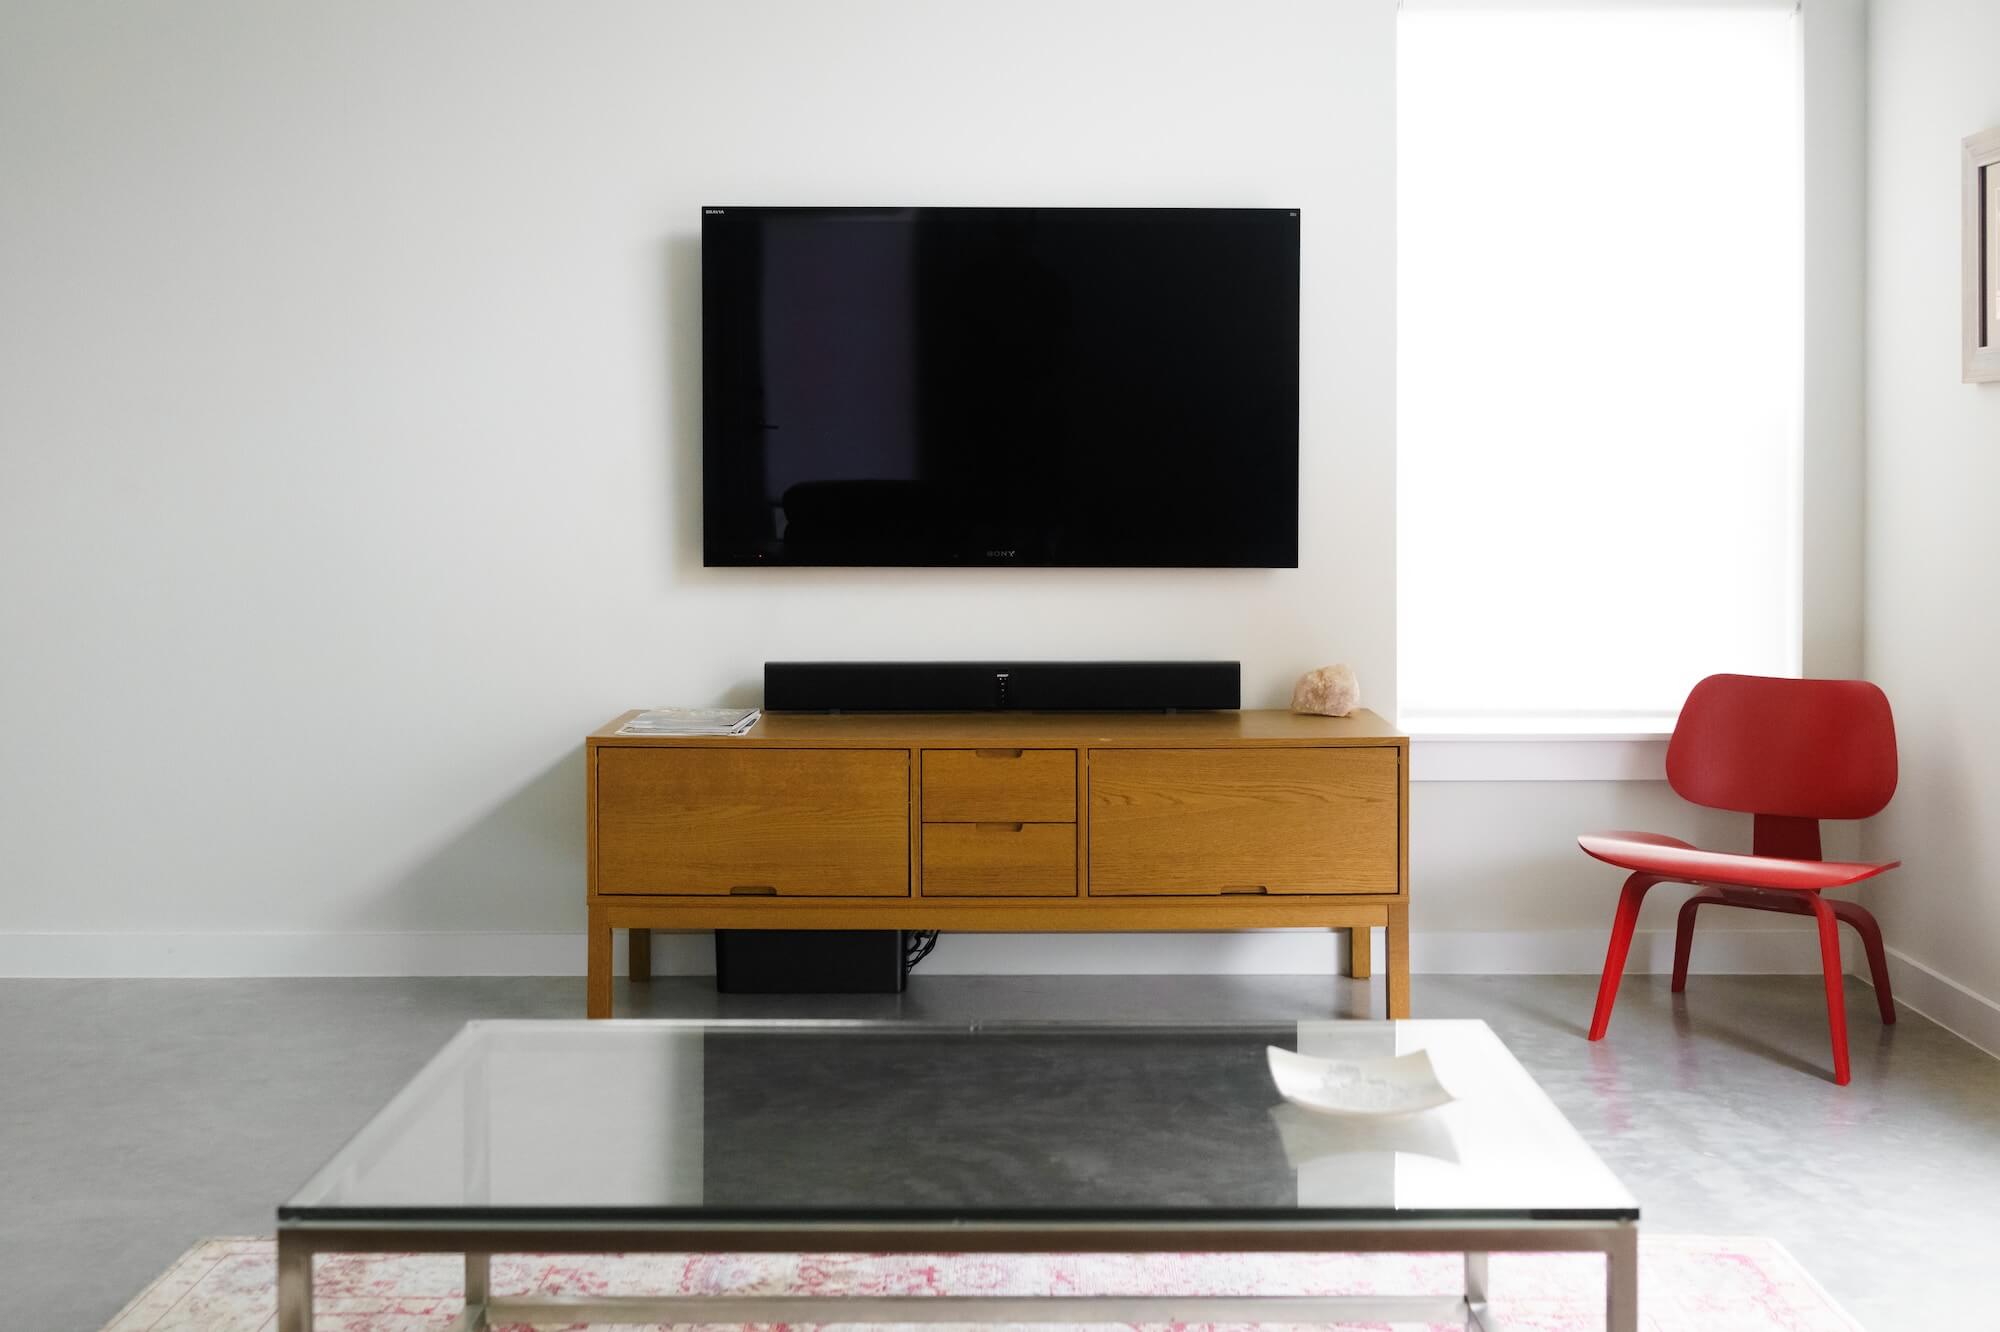 How to Secure TV to Wall: 6 Methods for Securing the TV